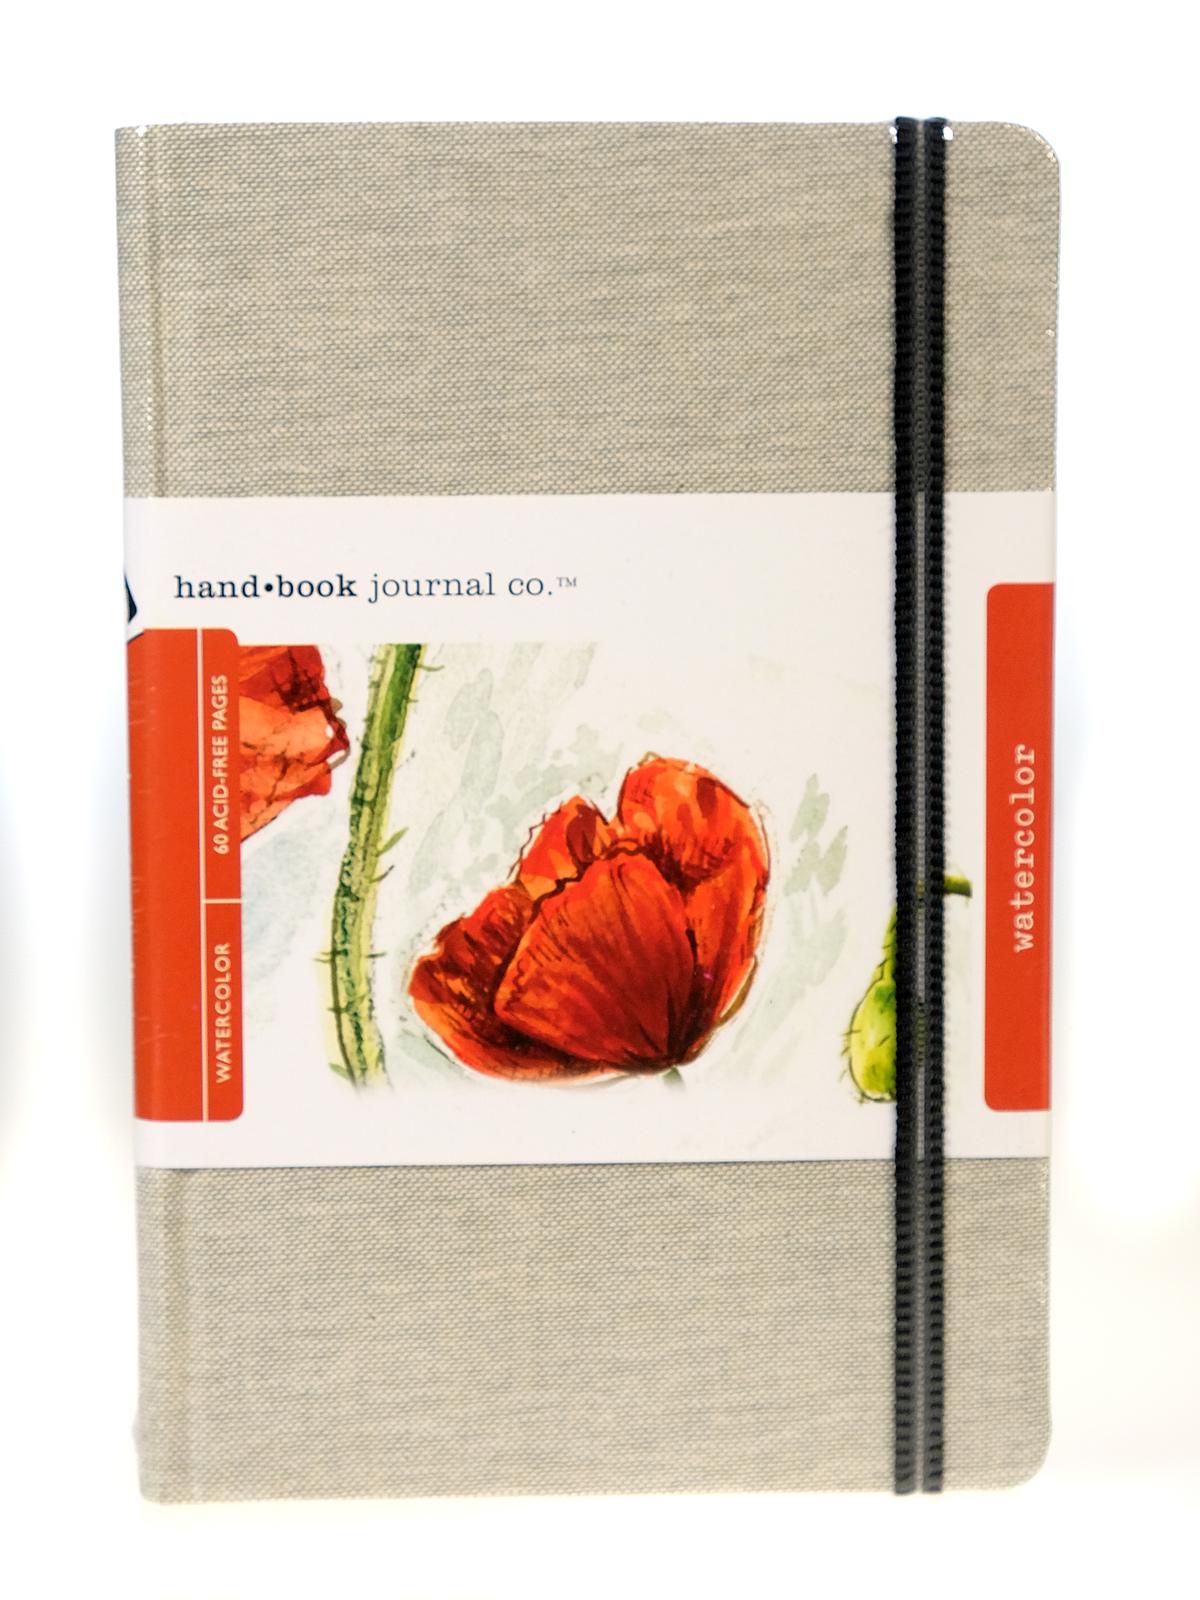 Travelogue Watercolor Journals Large Portrait 8 1 4 In. X 5 1 2 In. 90 Lb. (200 Gsm)